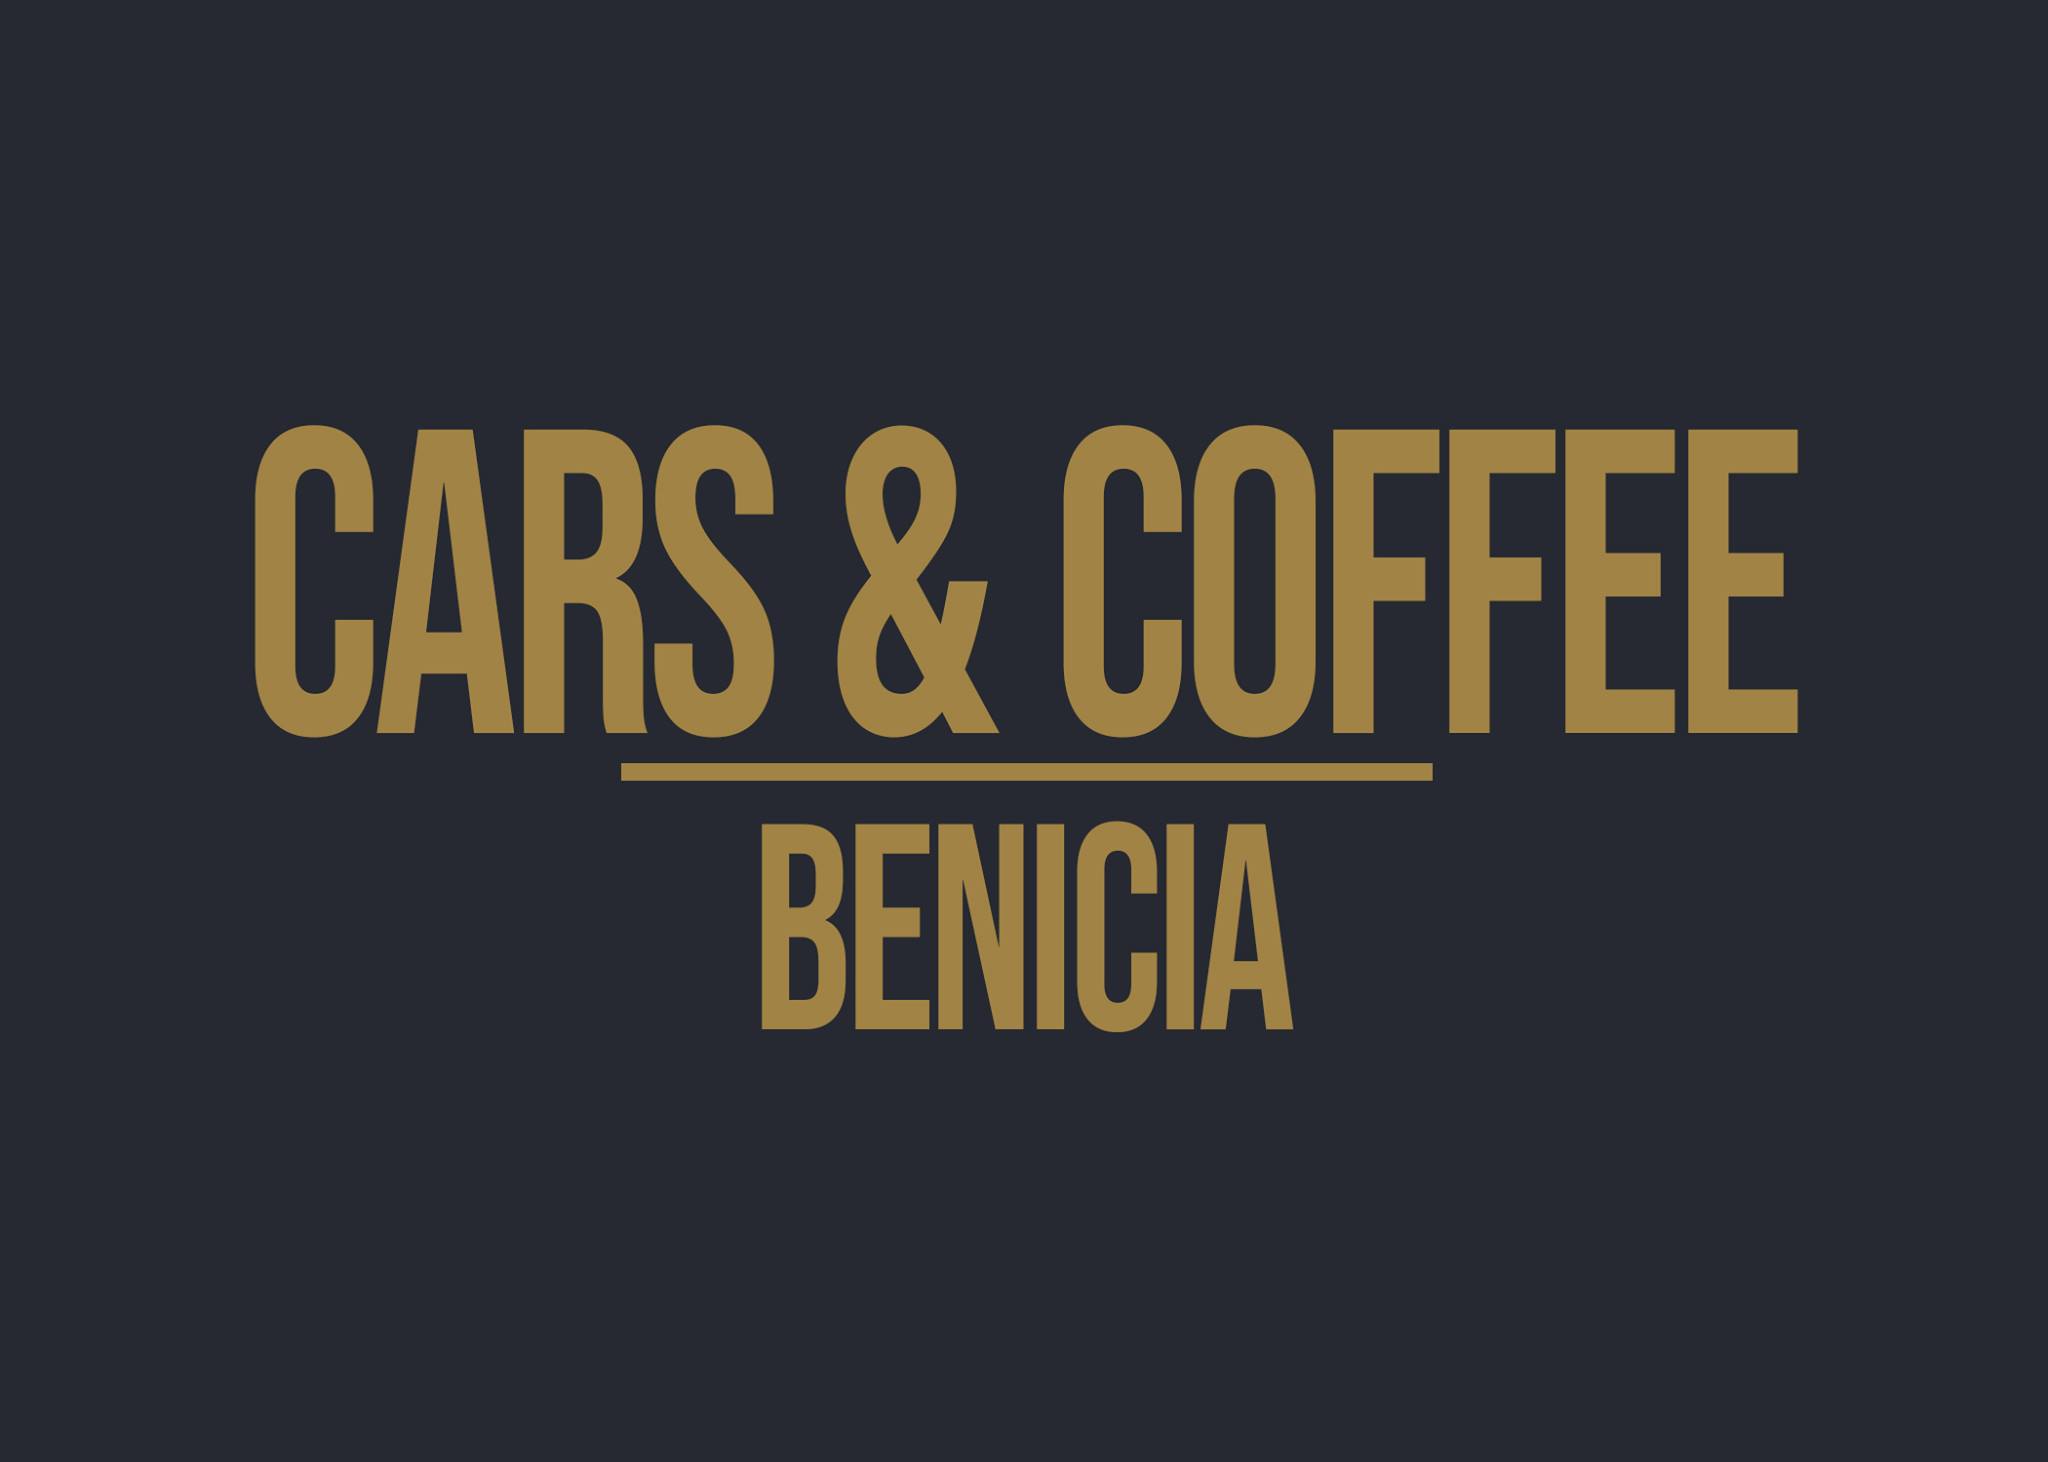 Benicia Cars, Motorcycles & Coffee